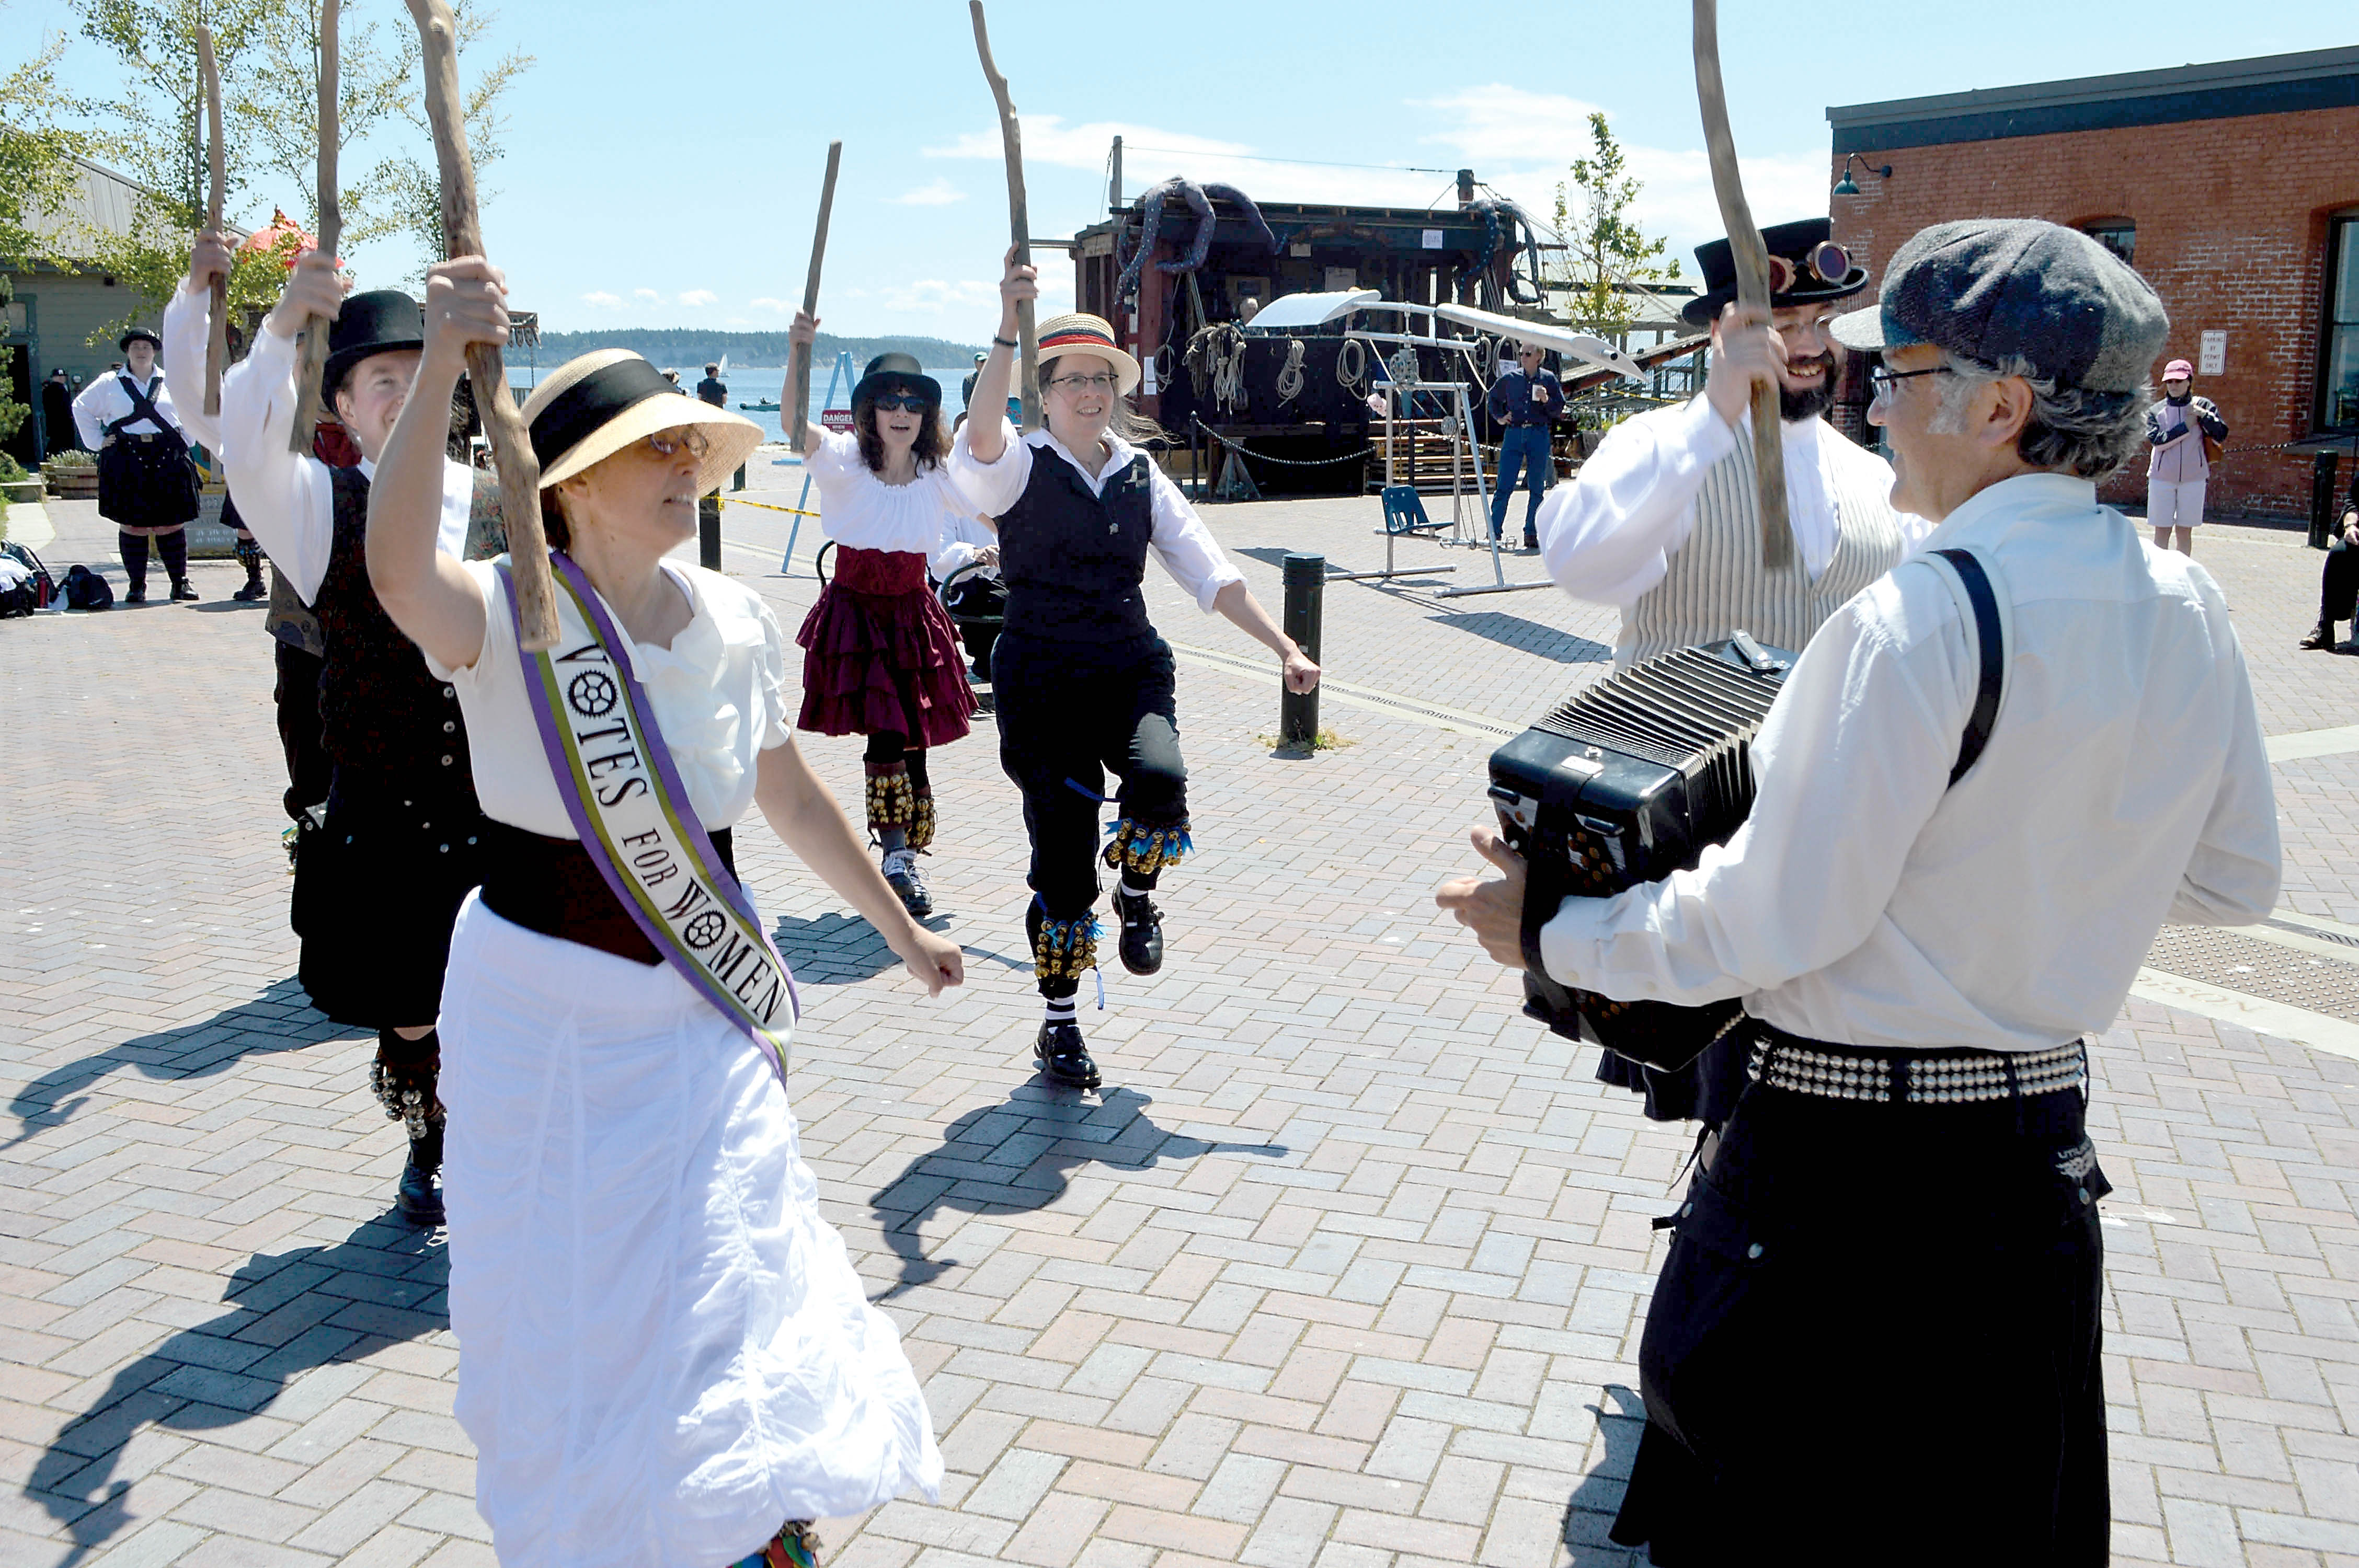 The Seattle-based Sound and Fury Morris & Sword traditional British dance troupe does a jig at Pope Marine Park in Port Townsend as part of the Brass Screw Confederacy’s third Steampunk Festival on Saturday.  —Photo by Joe Smillie/Peninsula Daily News